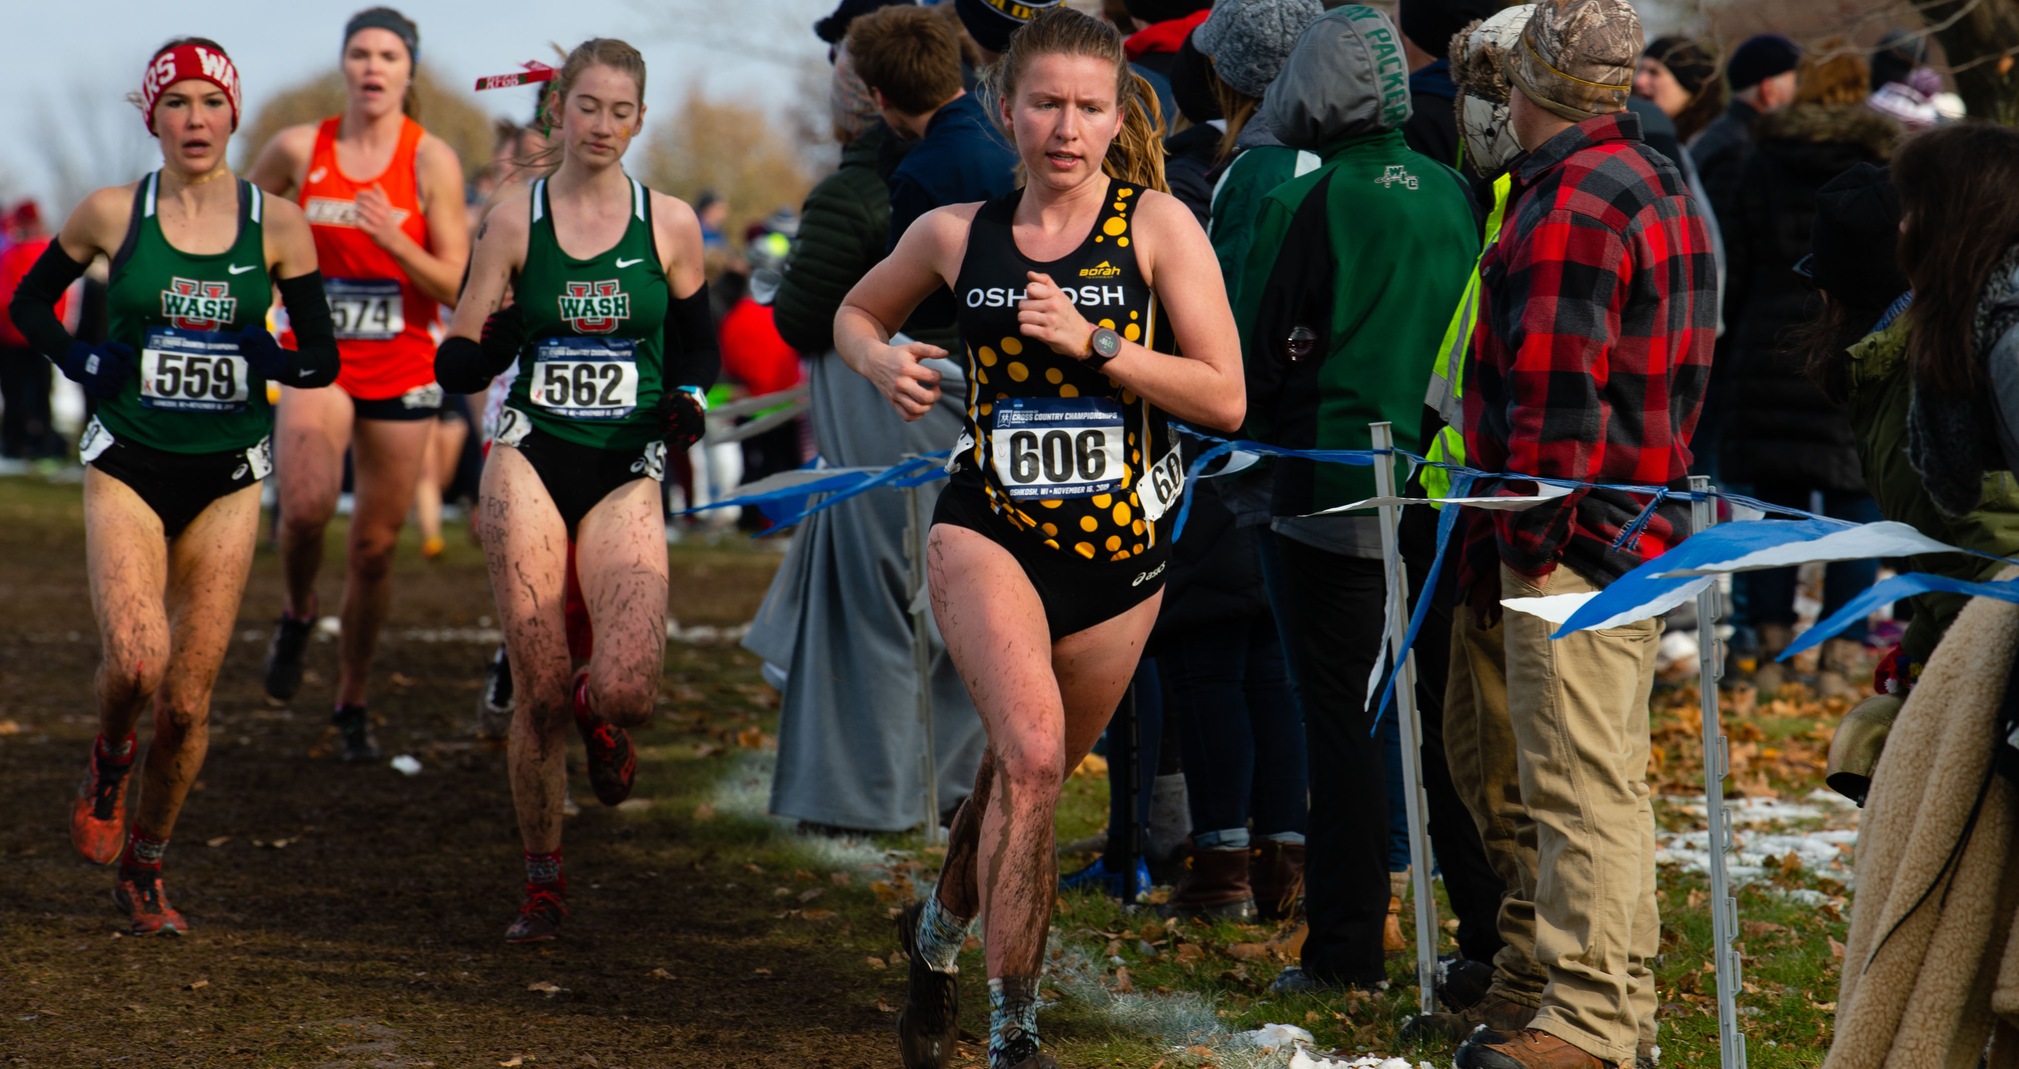 Ashton Keene's 39th-place finish at the NCAA Division III Championship secured her first All-America award.